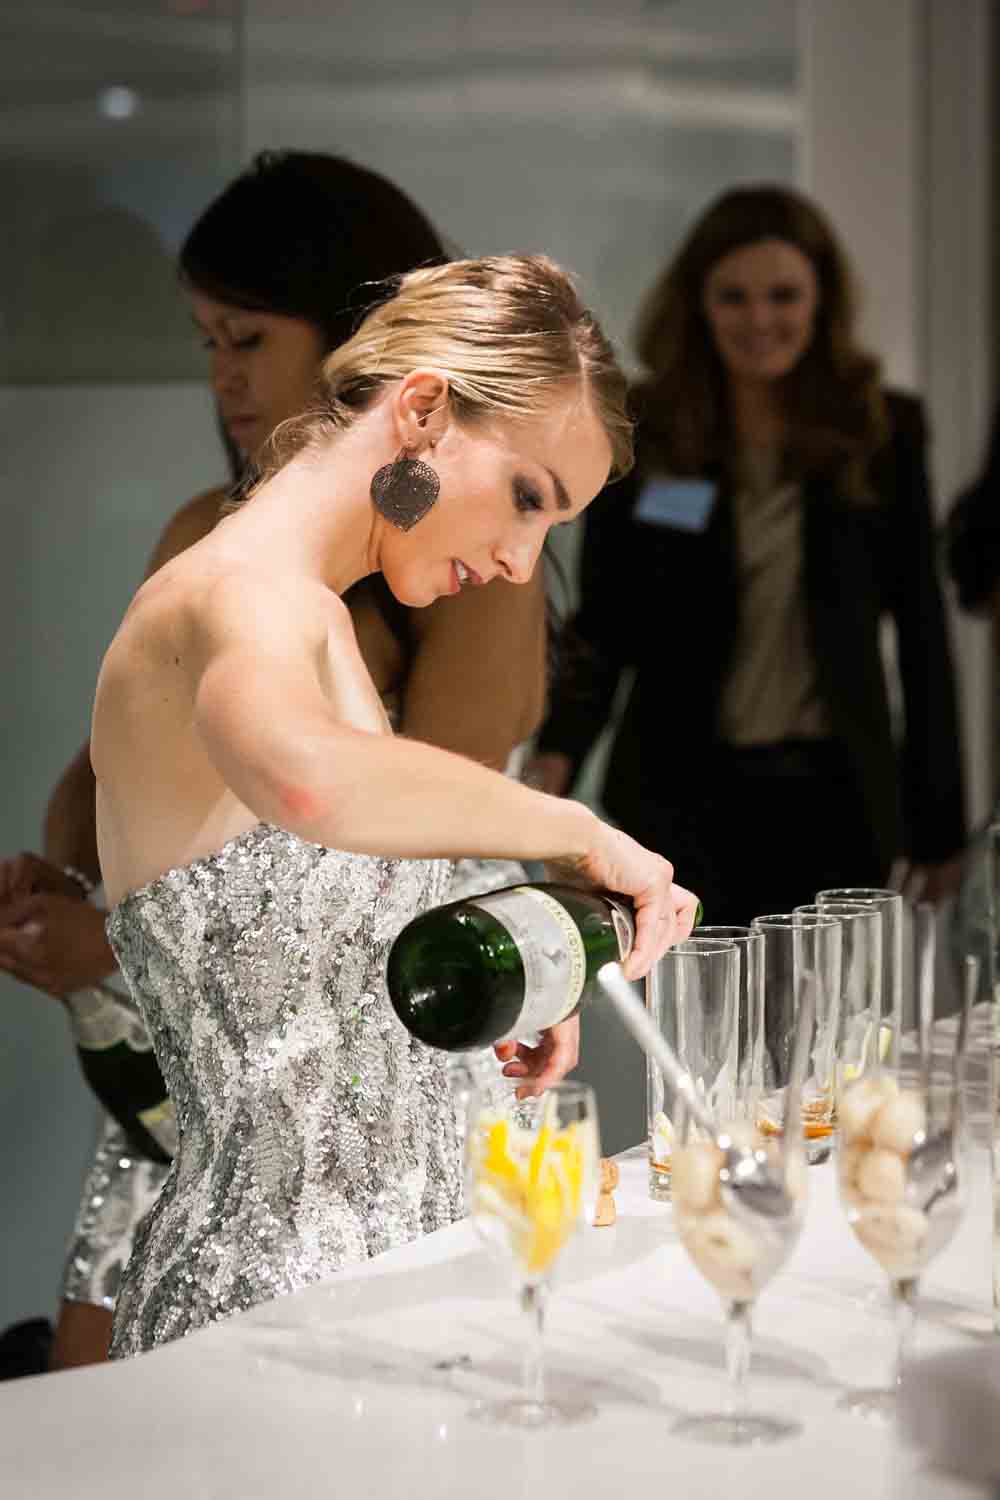 Woman wearing silver dress pouring champagne into glasses